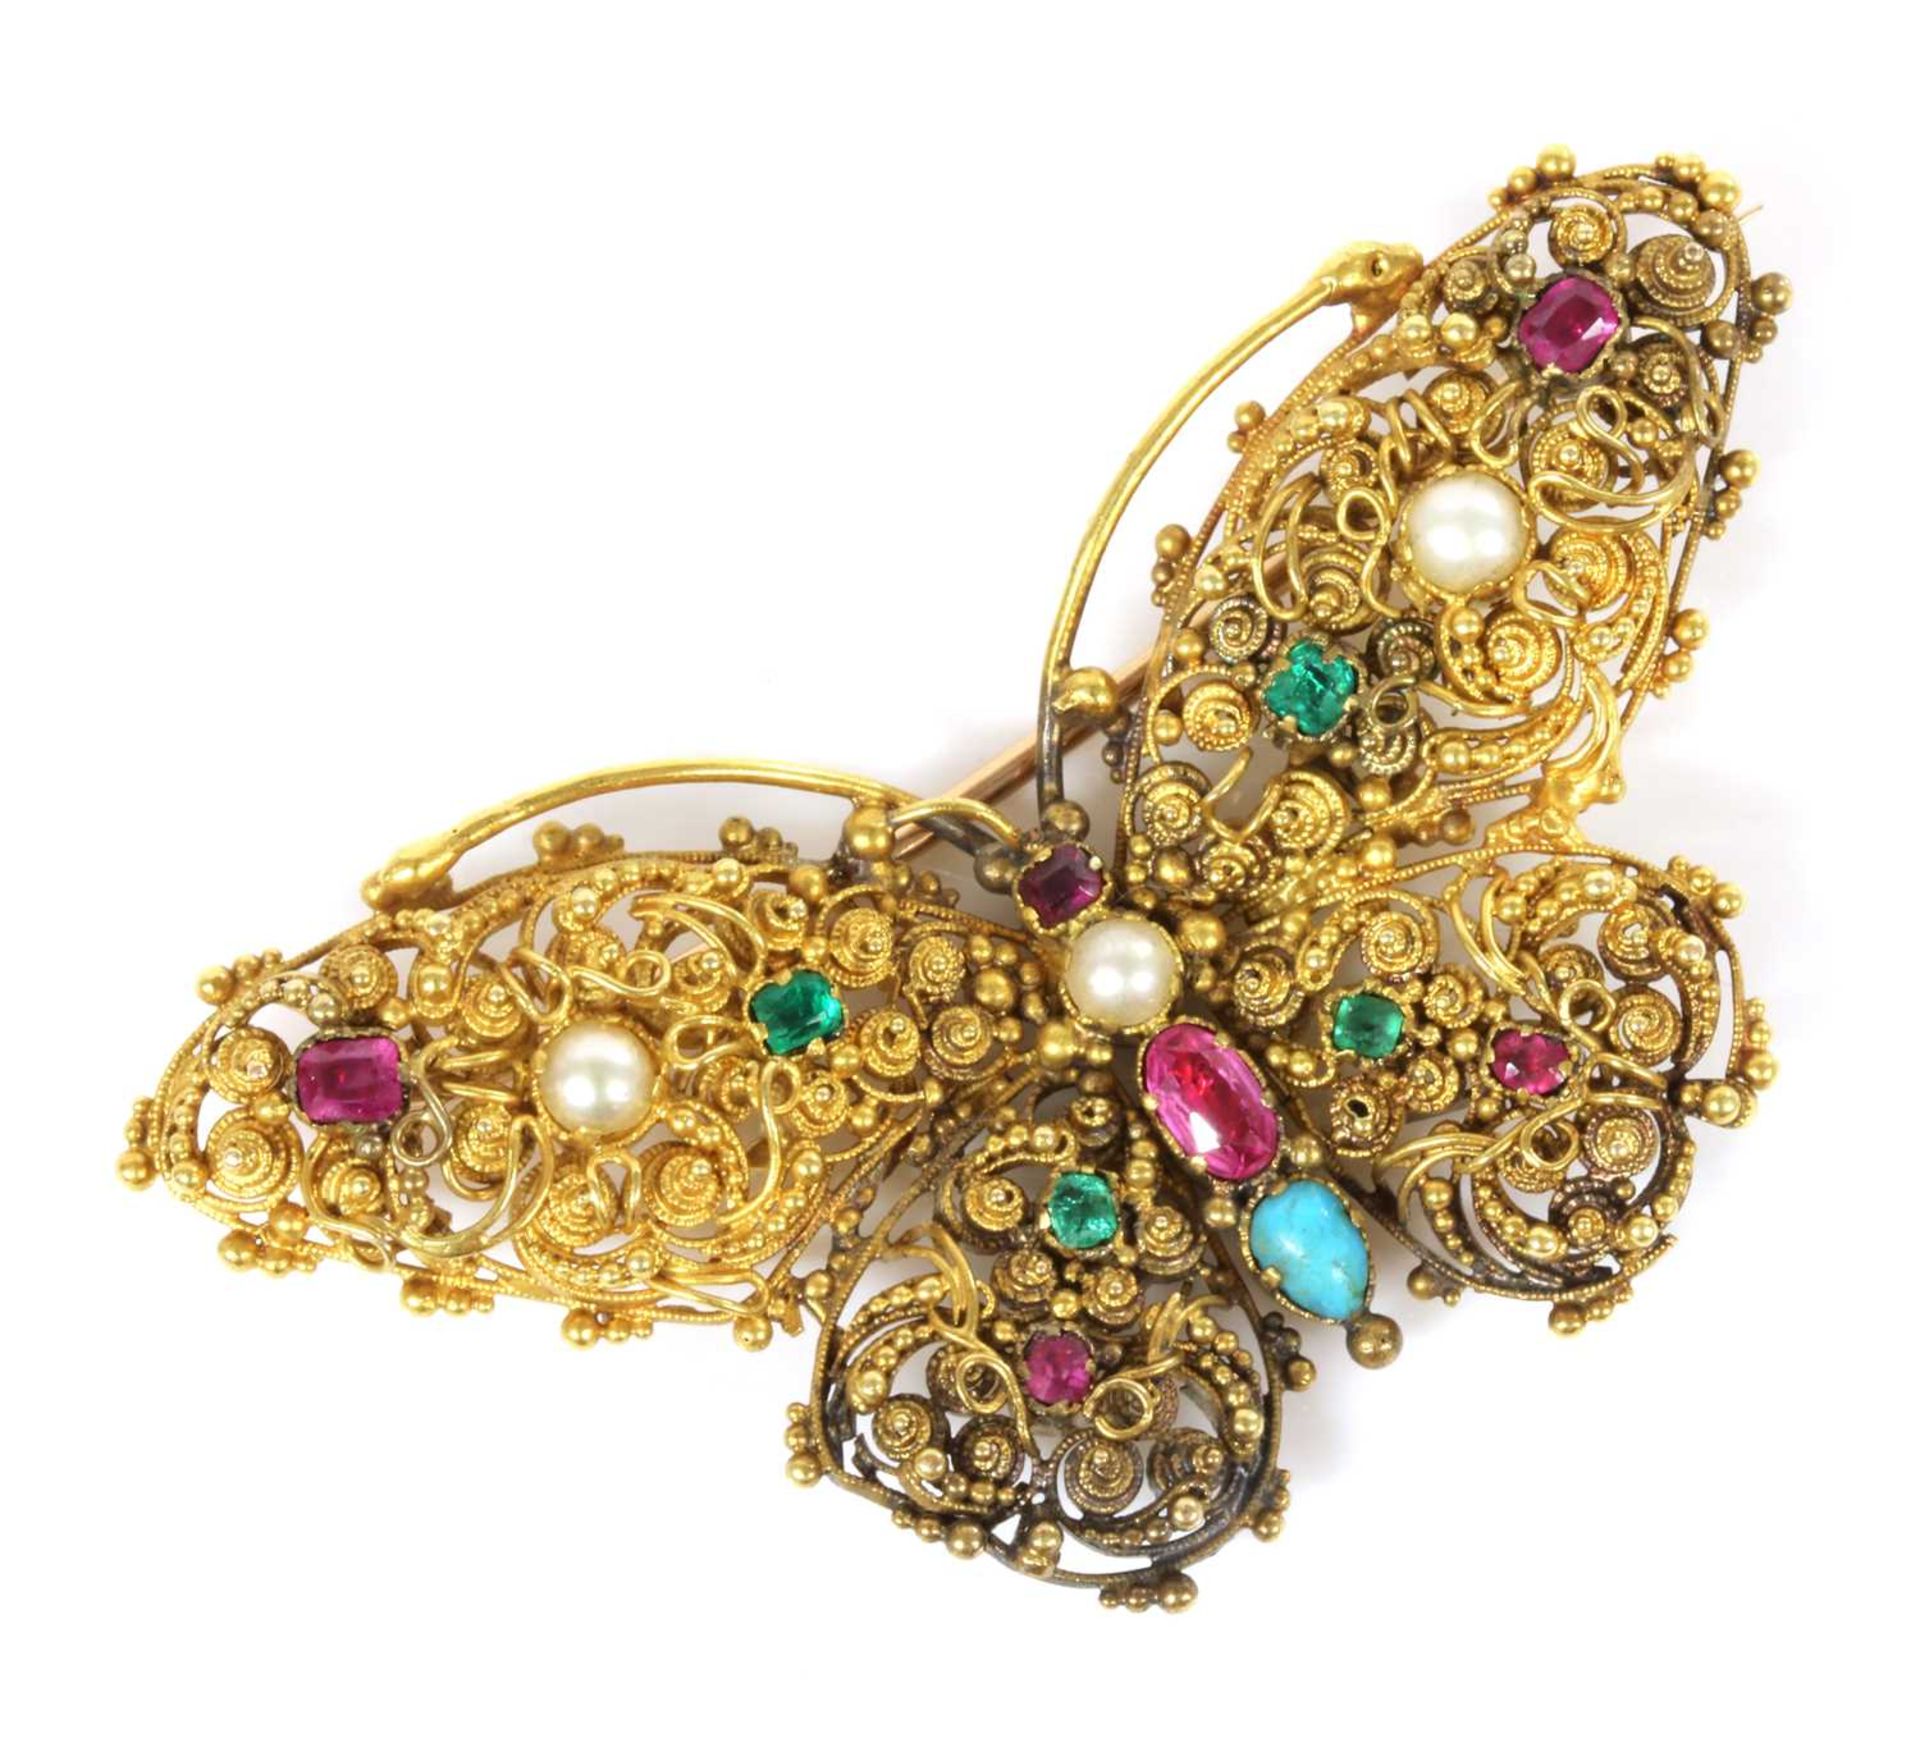 A Regency gold, gemstone and pearl butterfly brooch, c.1820,